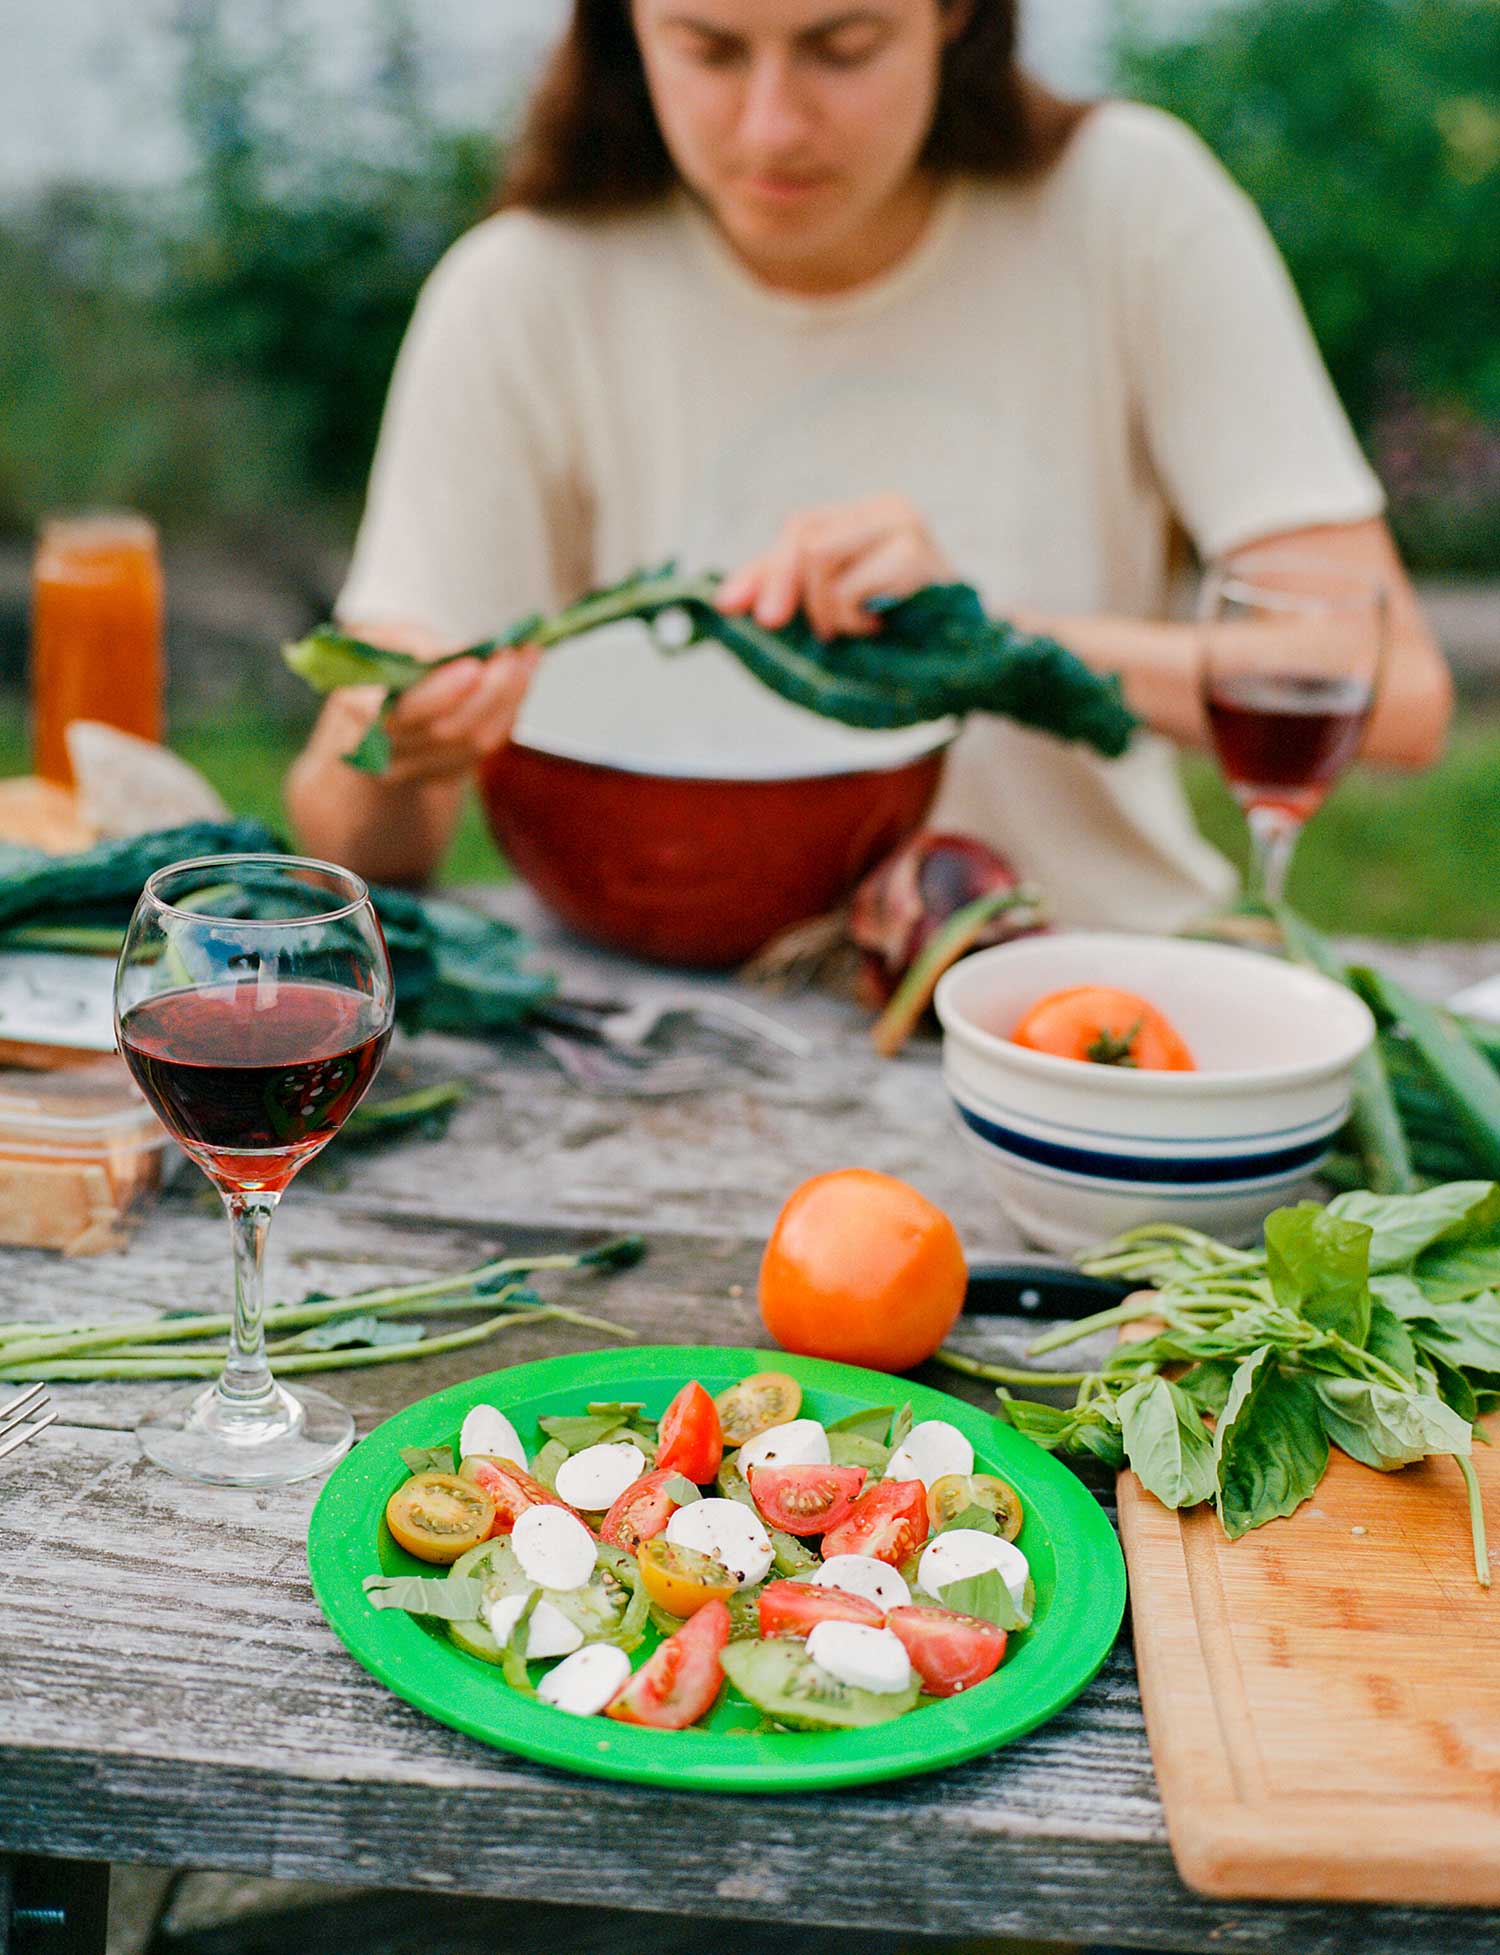 A person prepares dinner at a picnic table, near a plate with tomatoes and mozzarella.